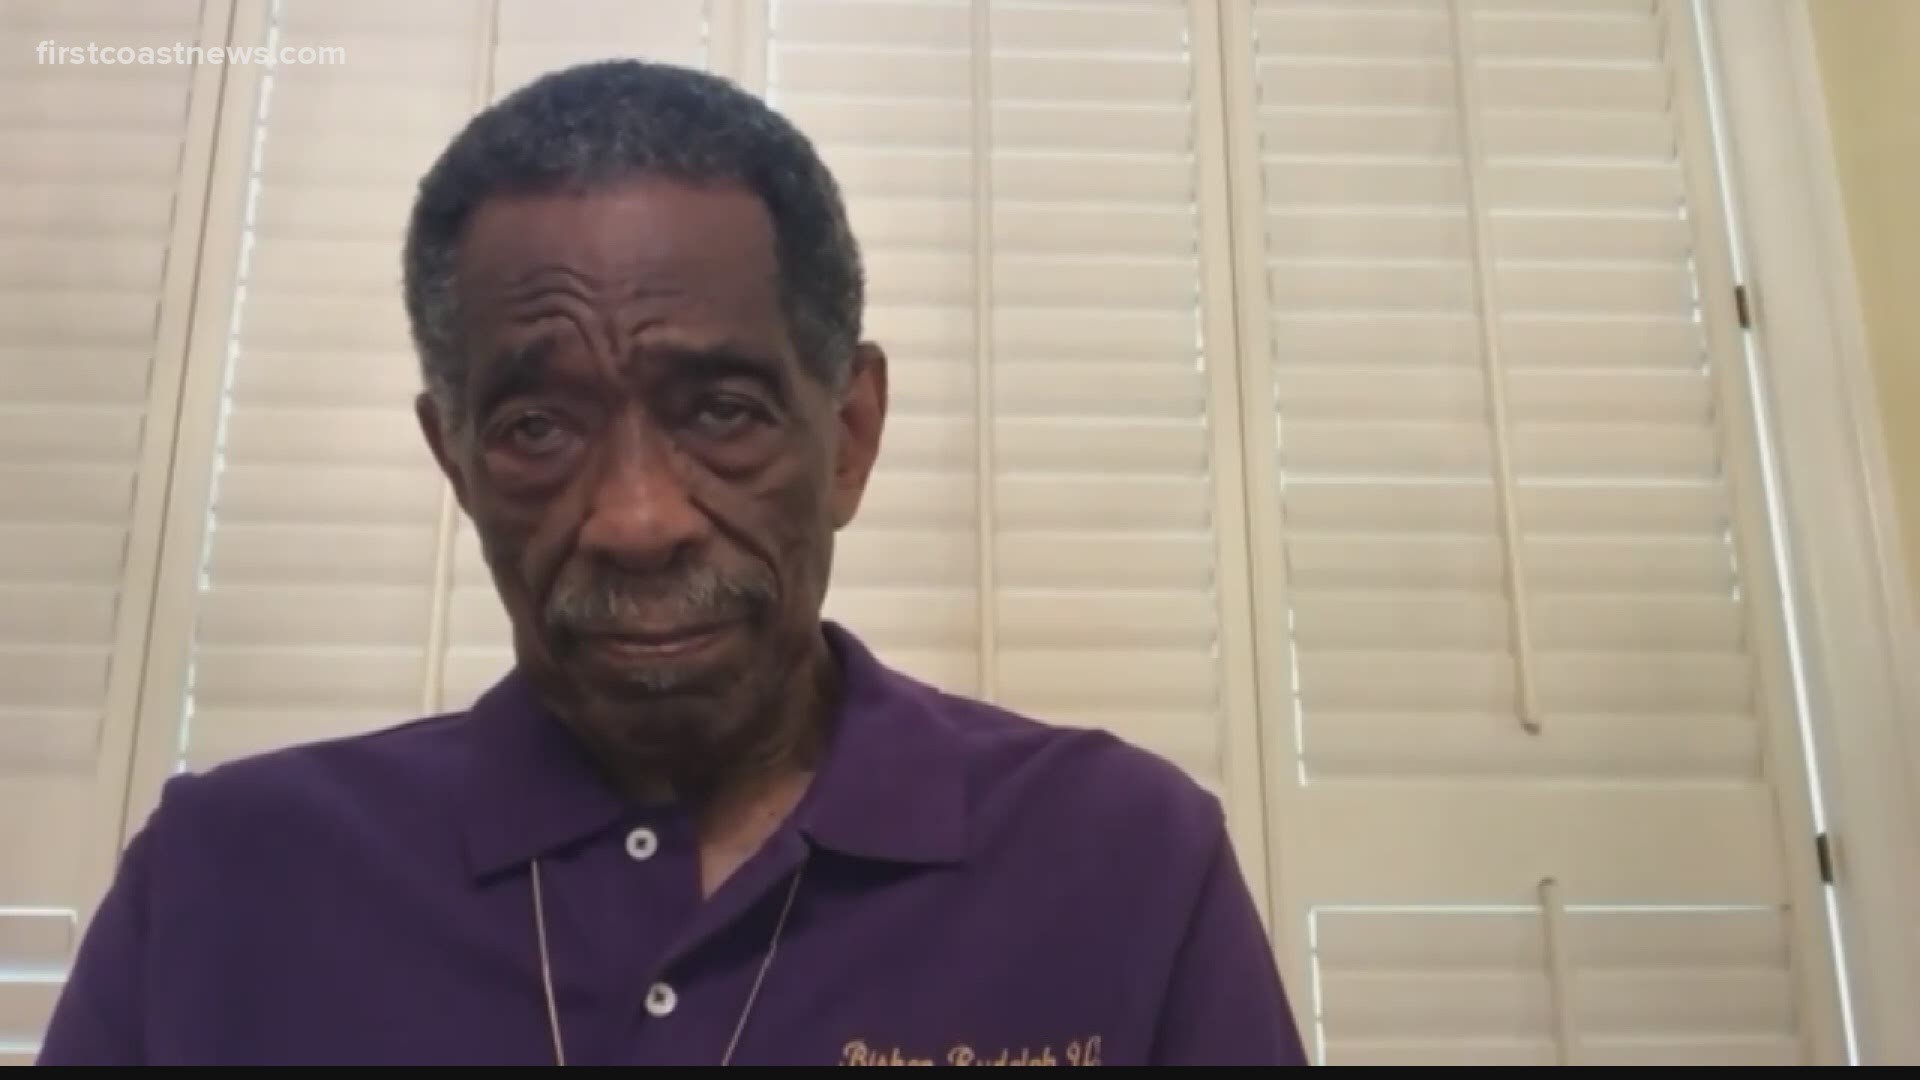 Bishop Rudolph McKissick Sr, 92 remembers seeing what he calls uprisings at age 16 and getting involved in marching for justice in Jacksonville.